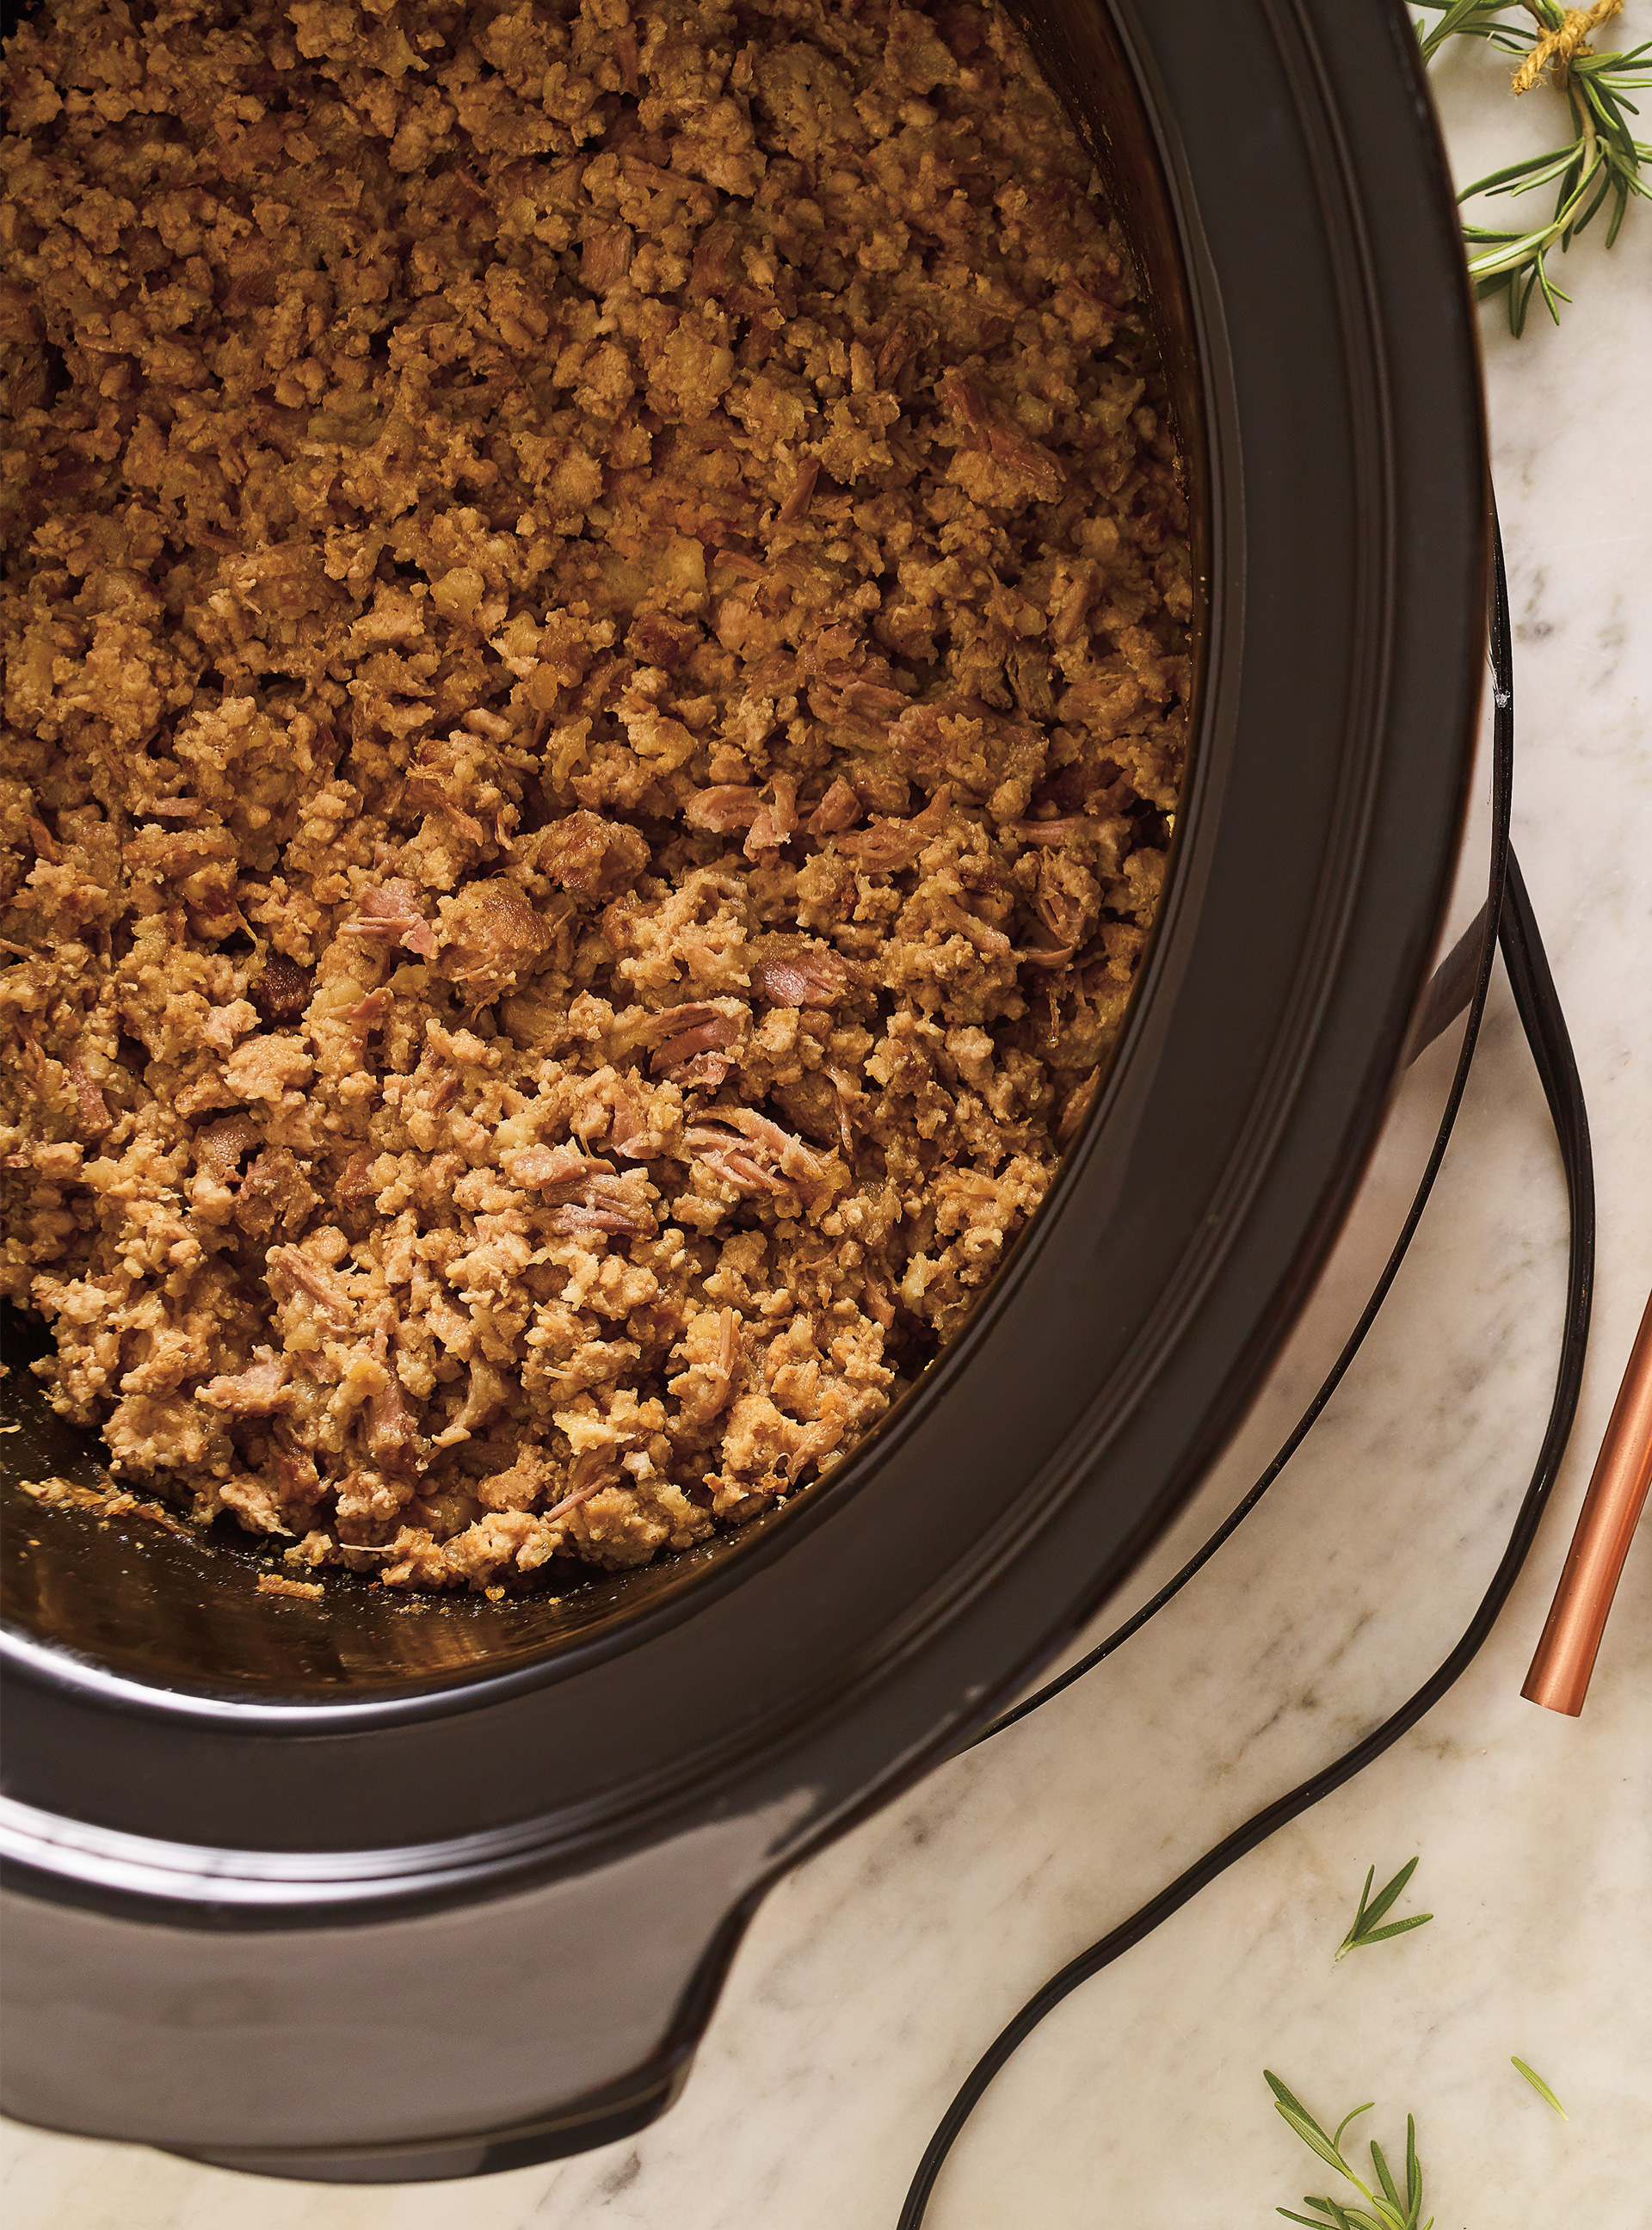 Slow Cooker Pork and Apple Stuffing